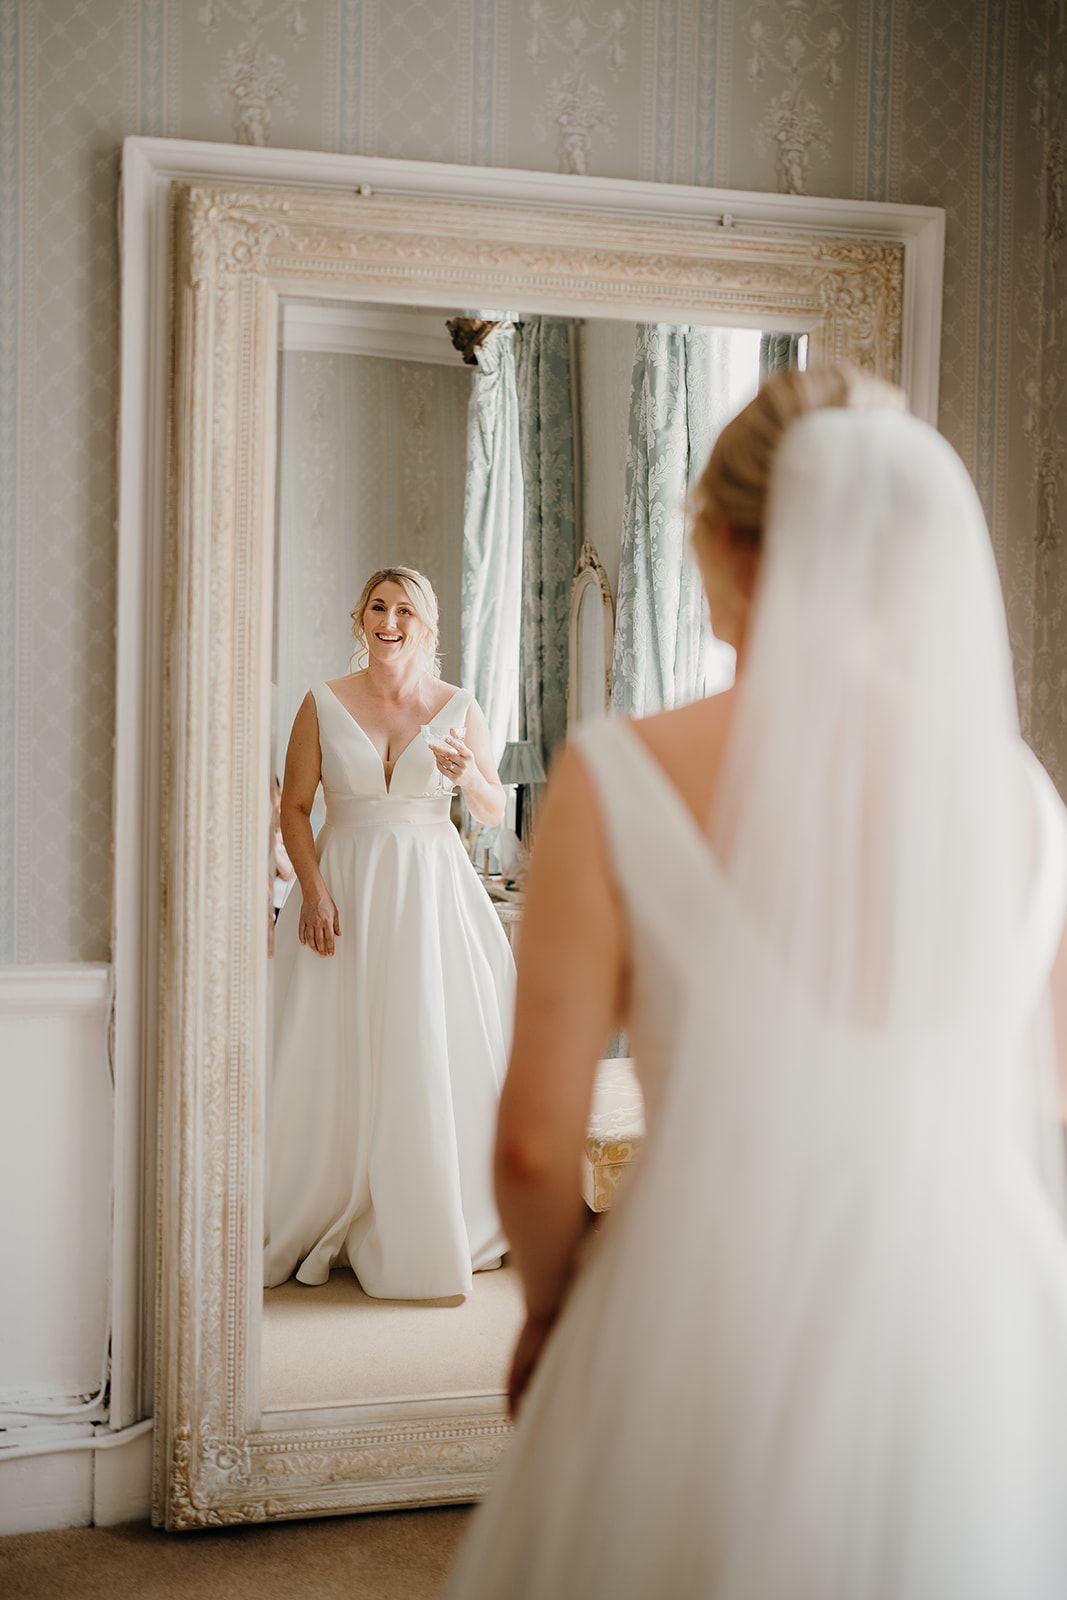 Bride seeing herself in the mirror